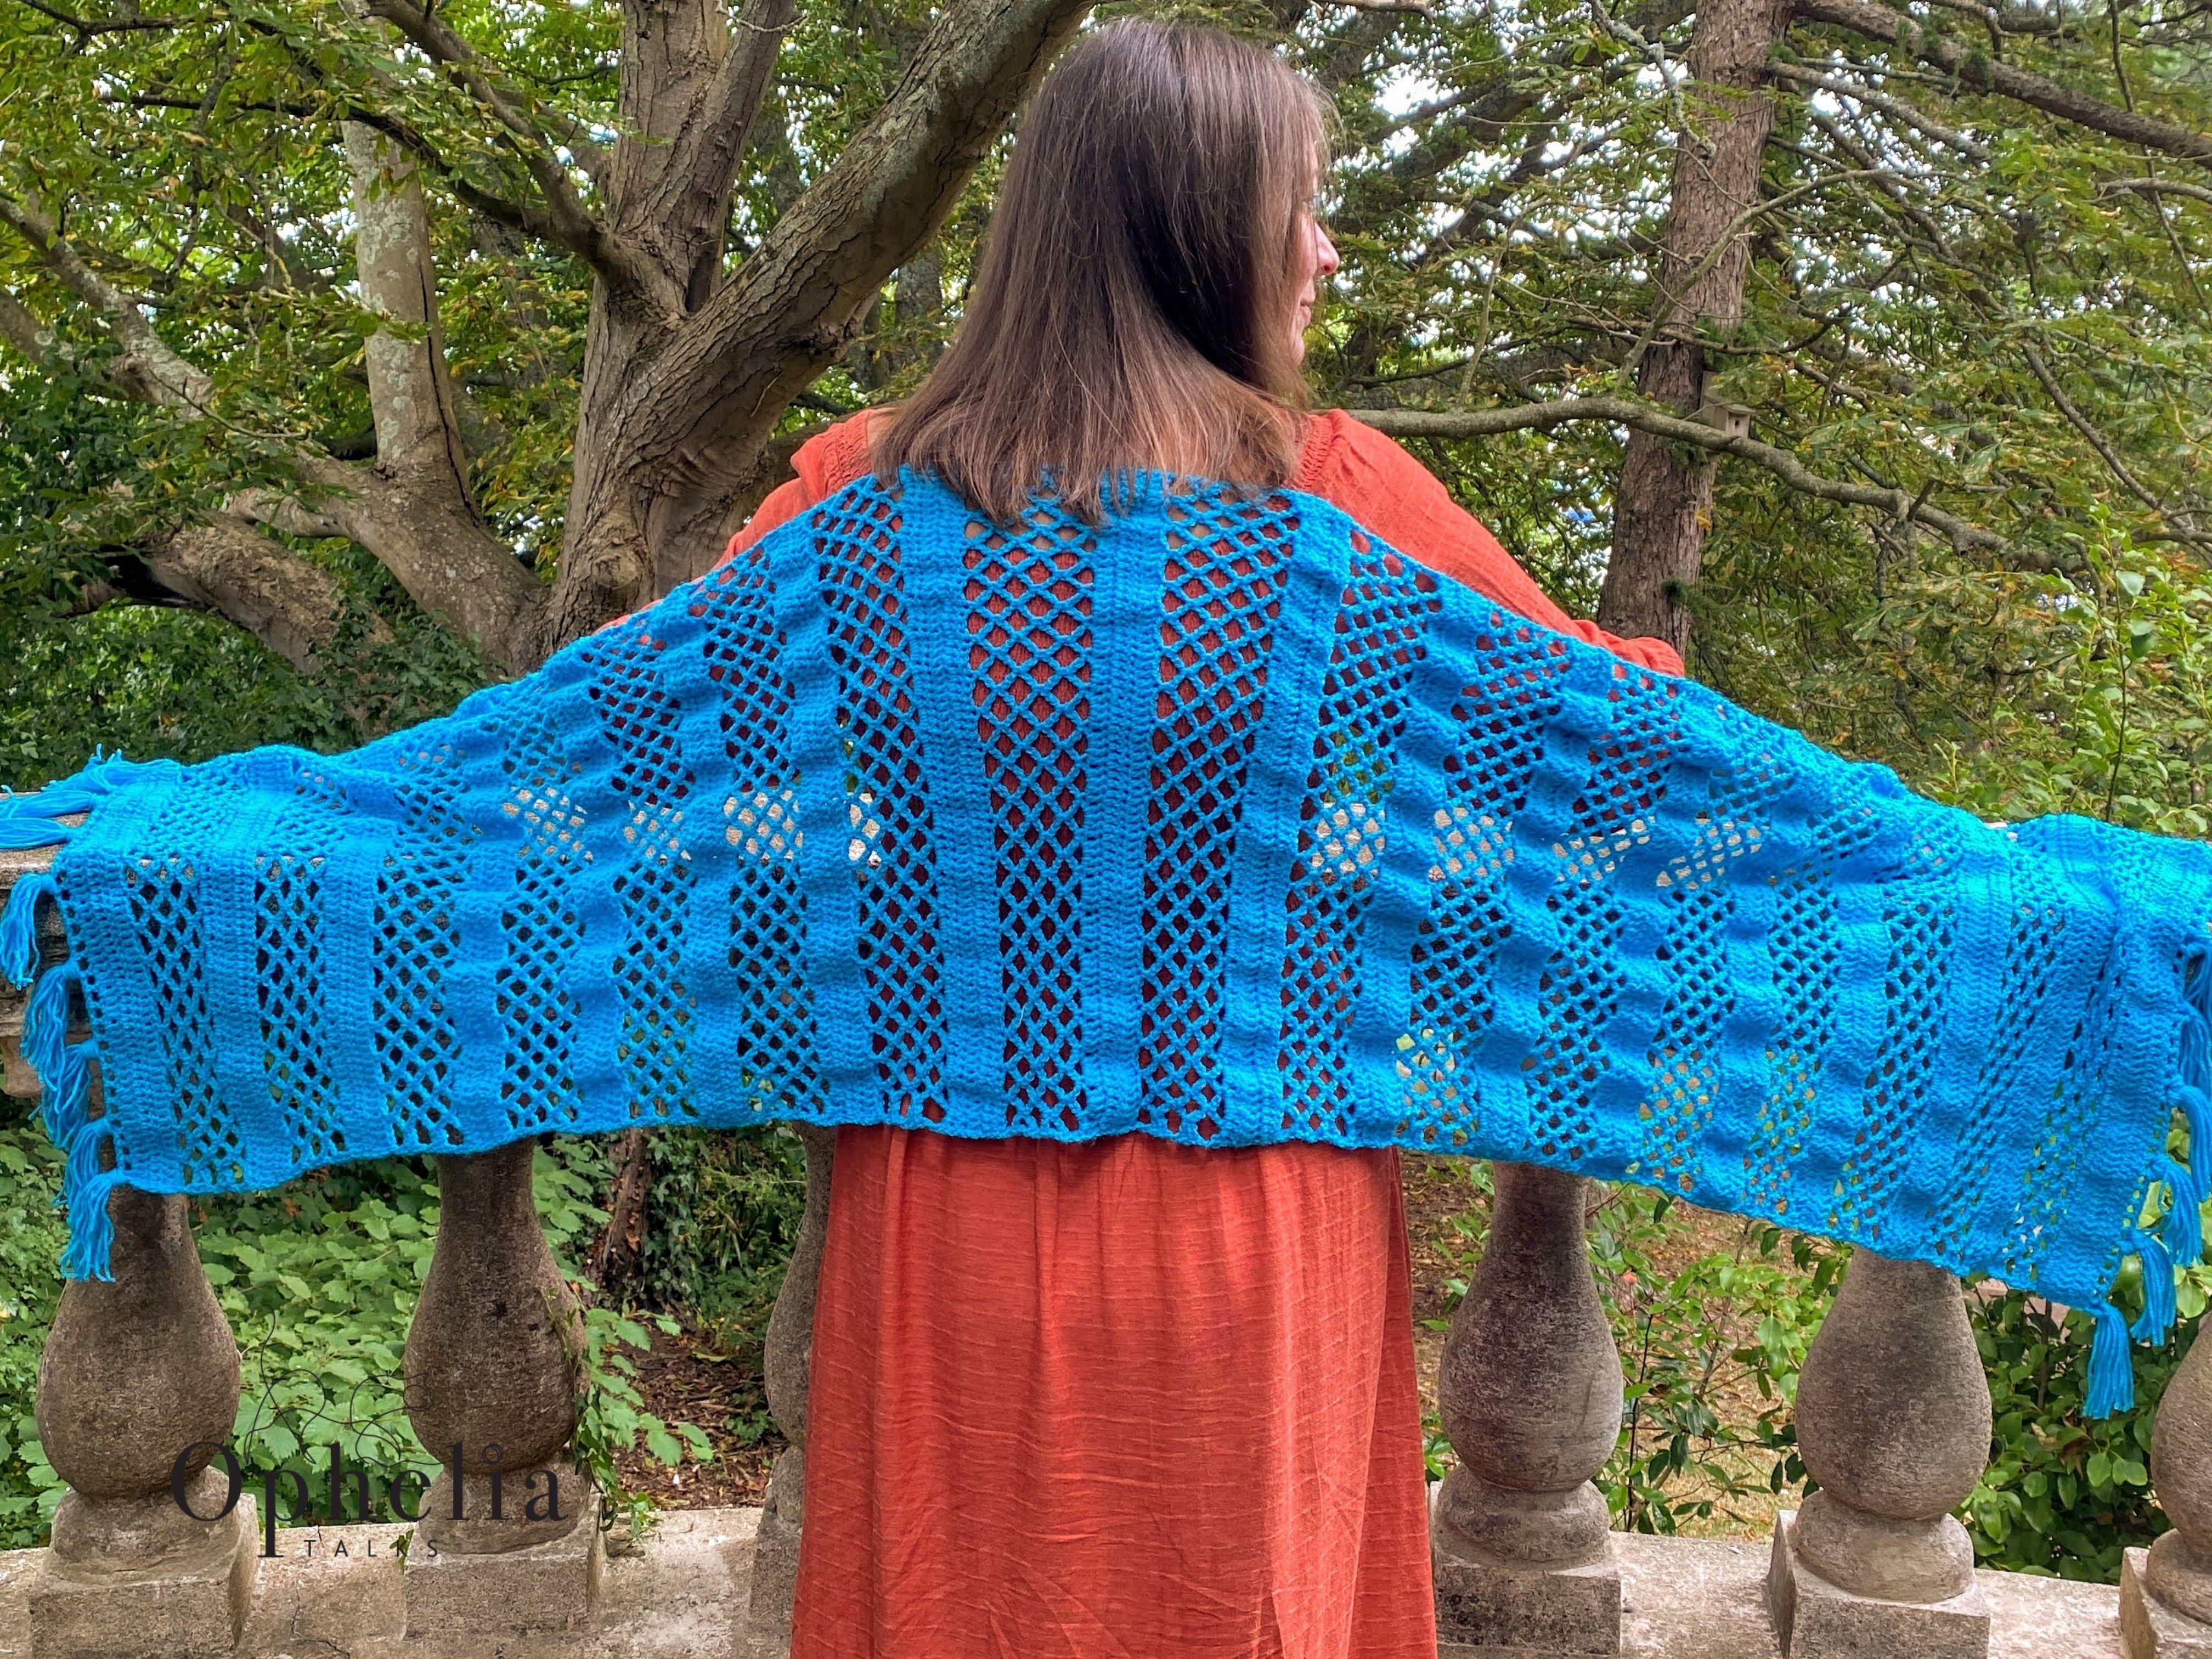 the width of the shawl